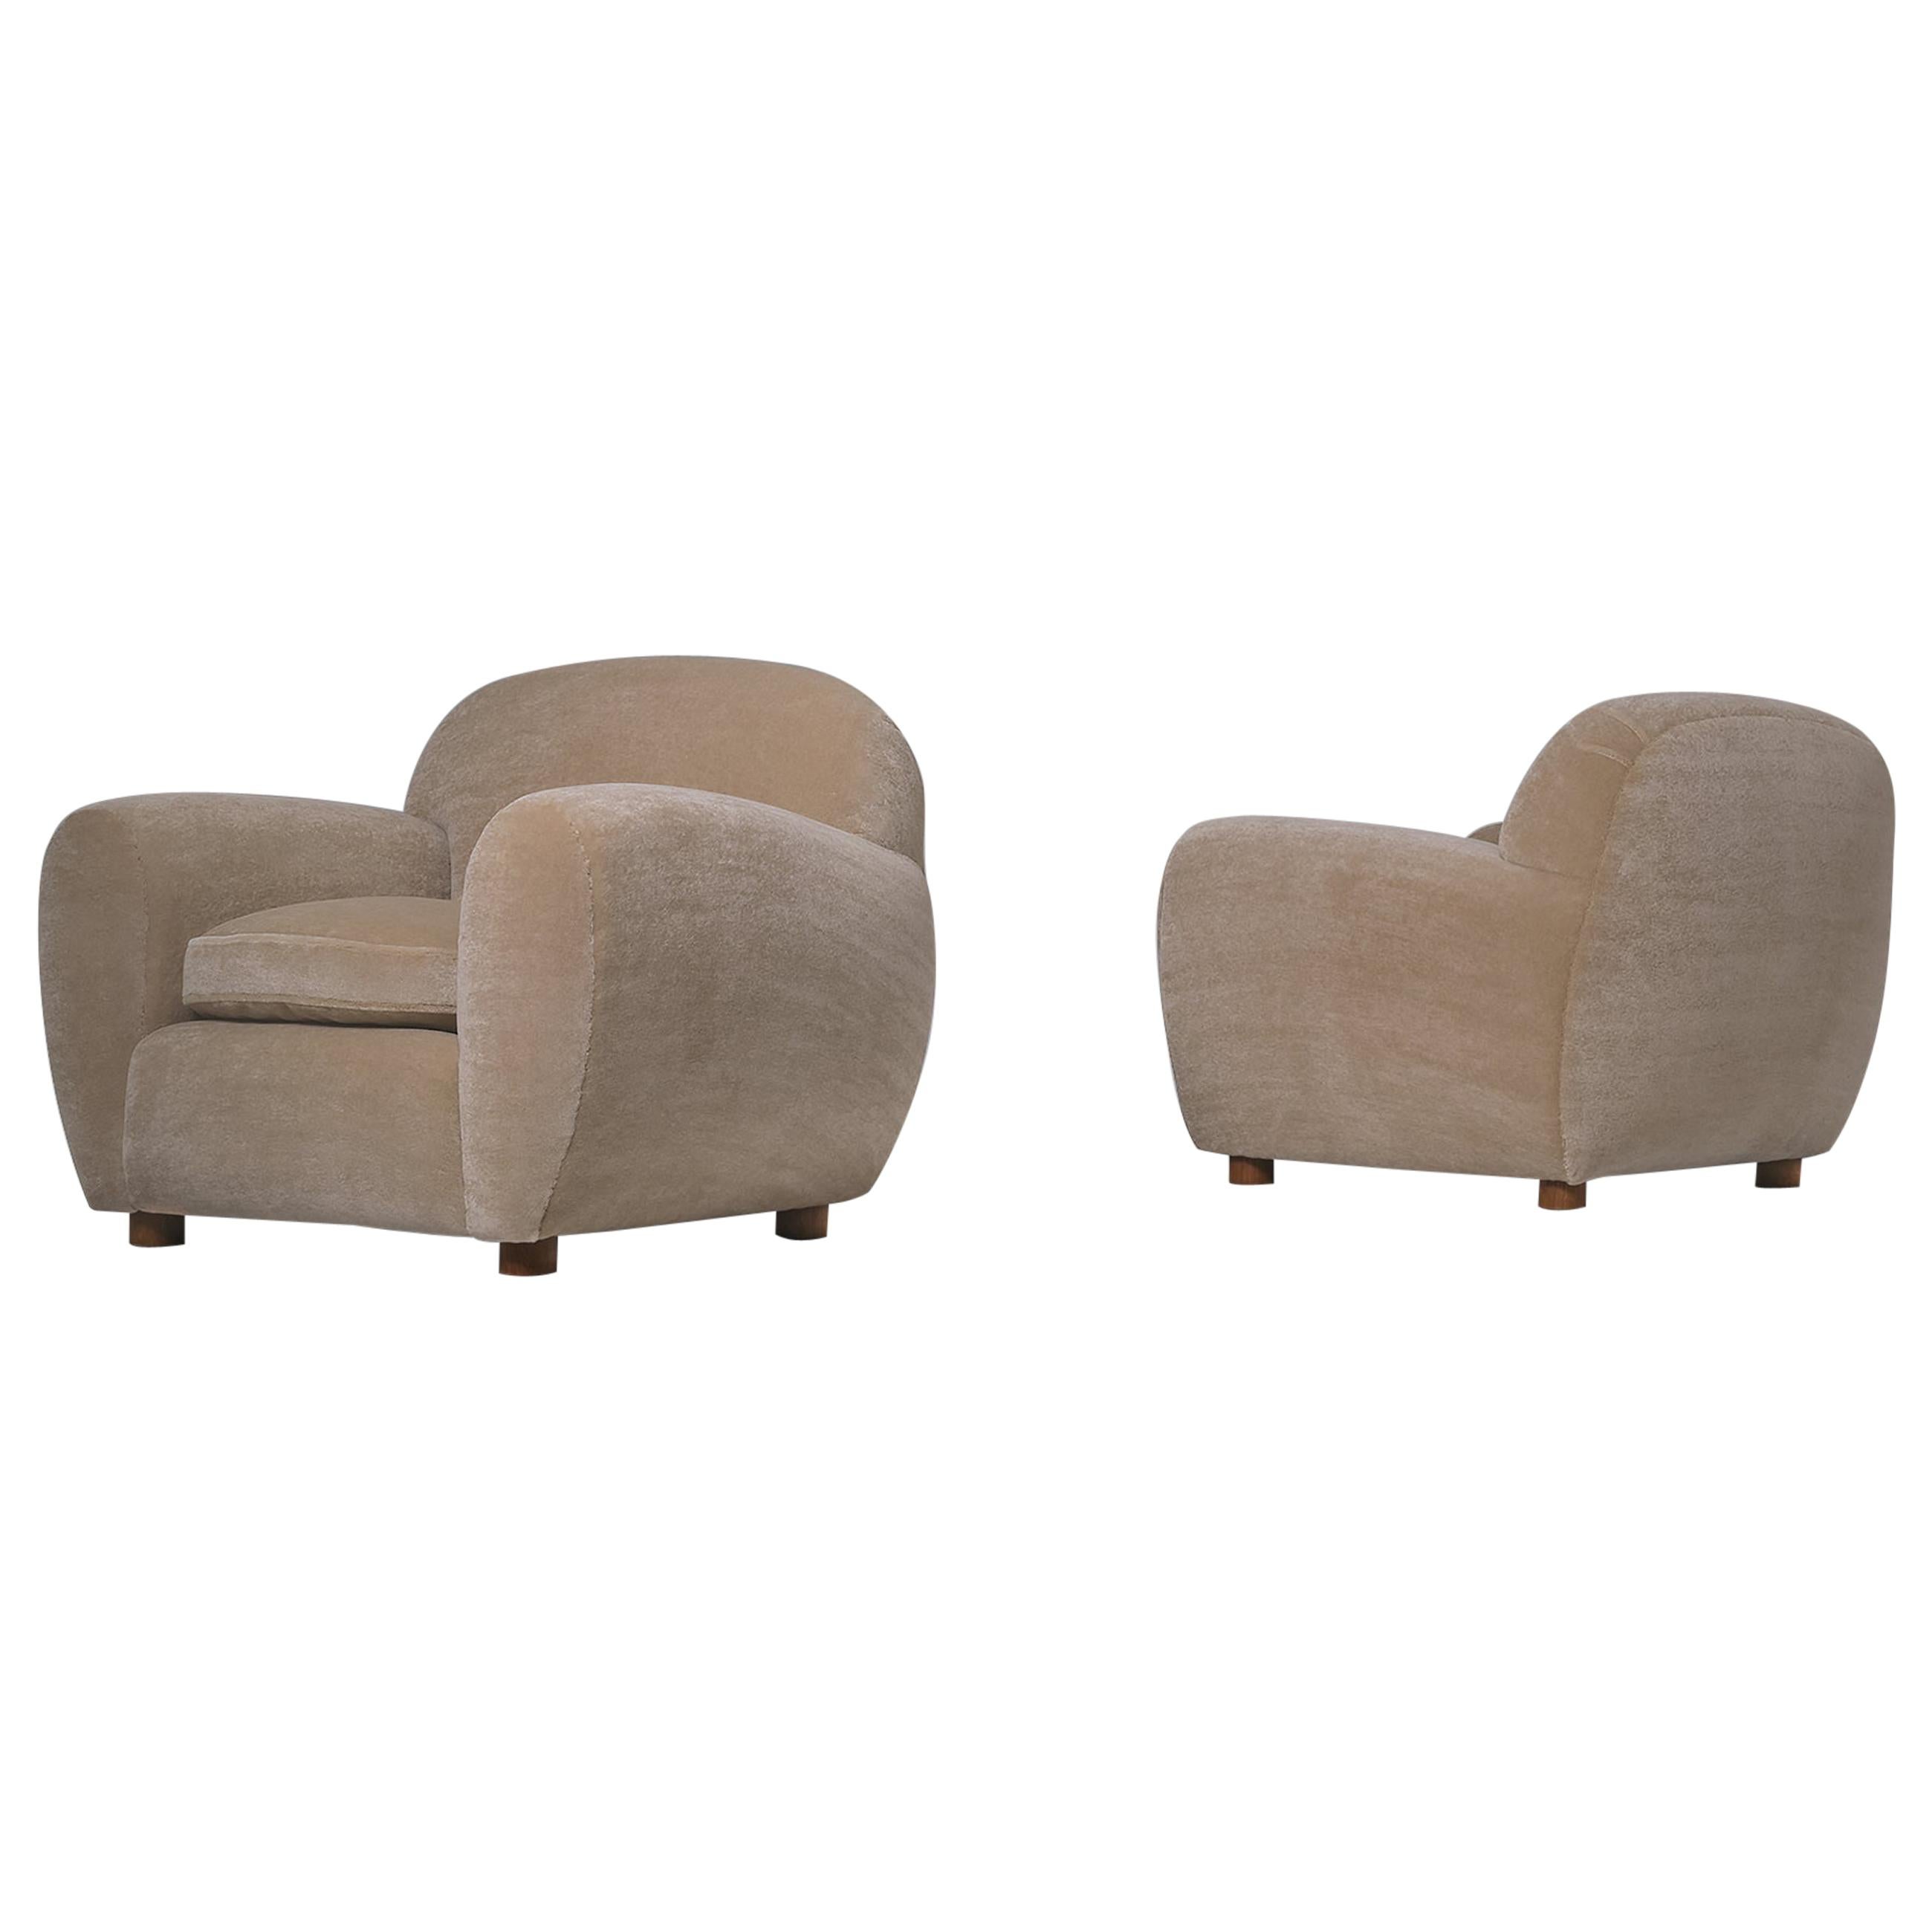 Pair of Curved Lounge Chairs in Oak & Mohair, 1950’s